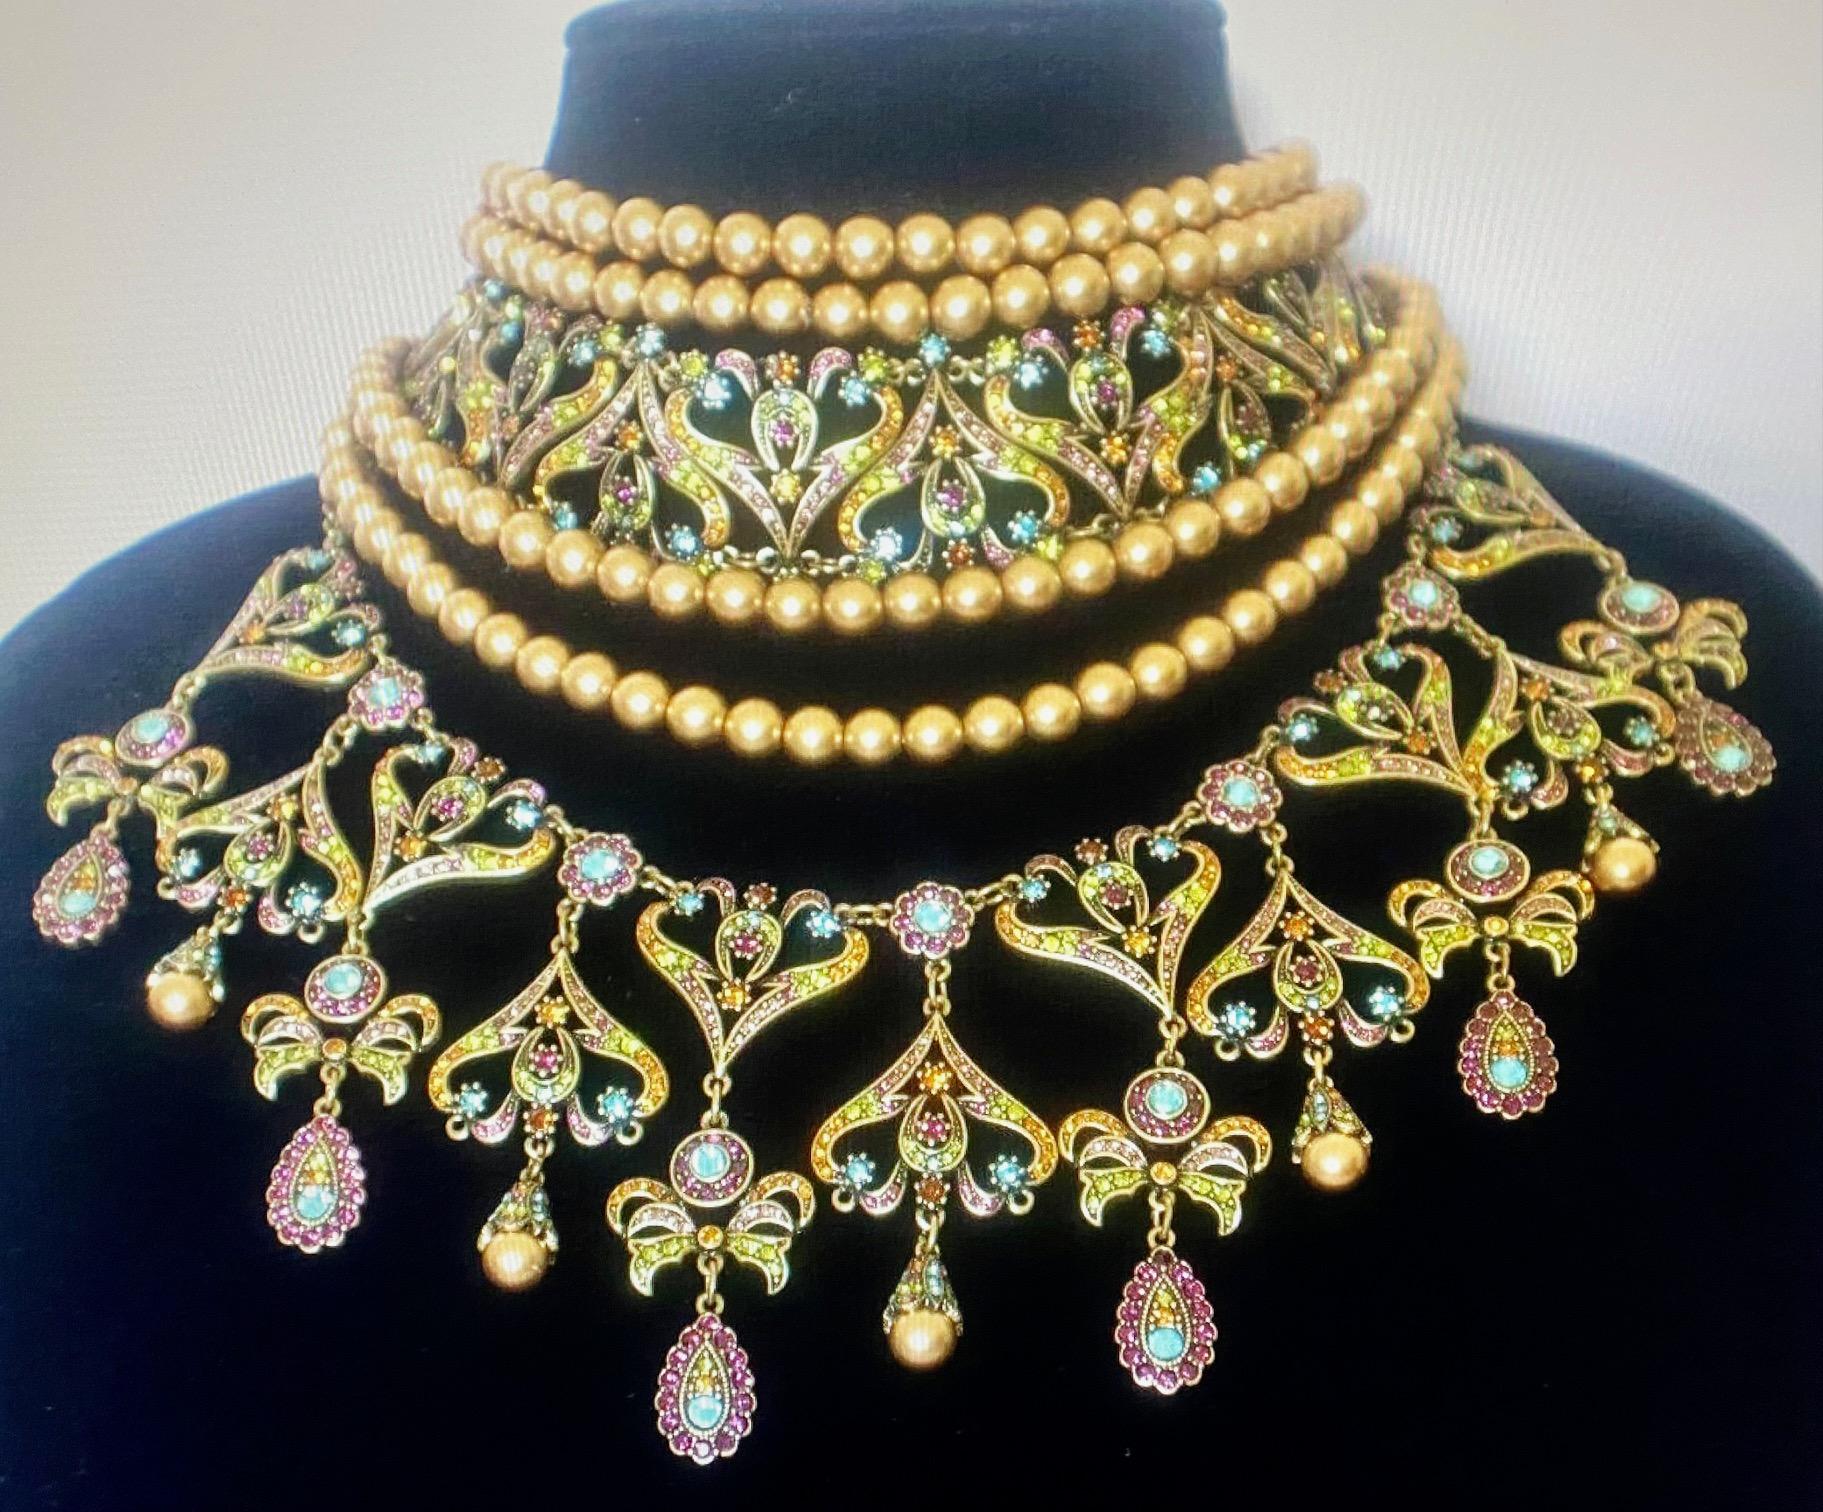 Heidi Daus Seductive Fantasy Gold Choker Dangle Beaded Necklace & Earring Set Clip Ons SWAROVSKI RARE PC

Simply Breathtaking!!!
The necklace is ridiculously gorgeous!
Easily the most beautiful necklace I've ever seen.
It's all a matter of